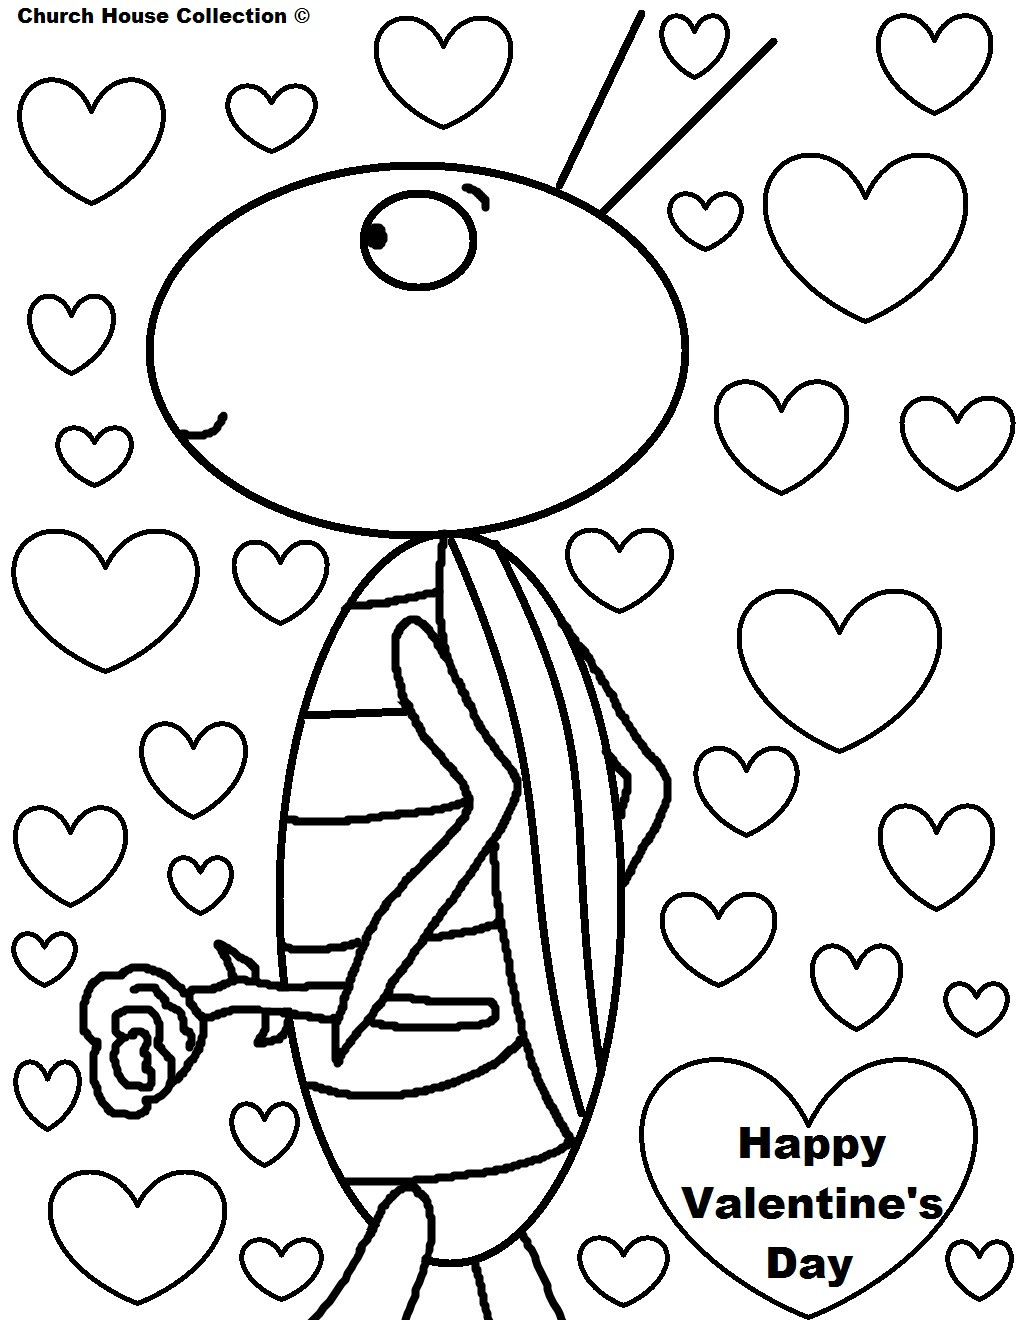 Valentine Coloring Pages Free Printable
 Church House Collection Blog Valentine s Day Coloring